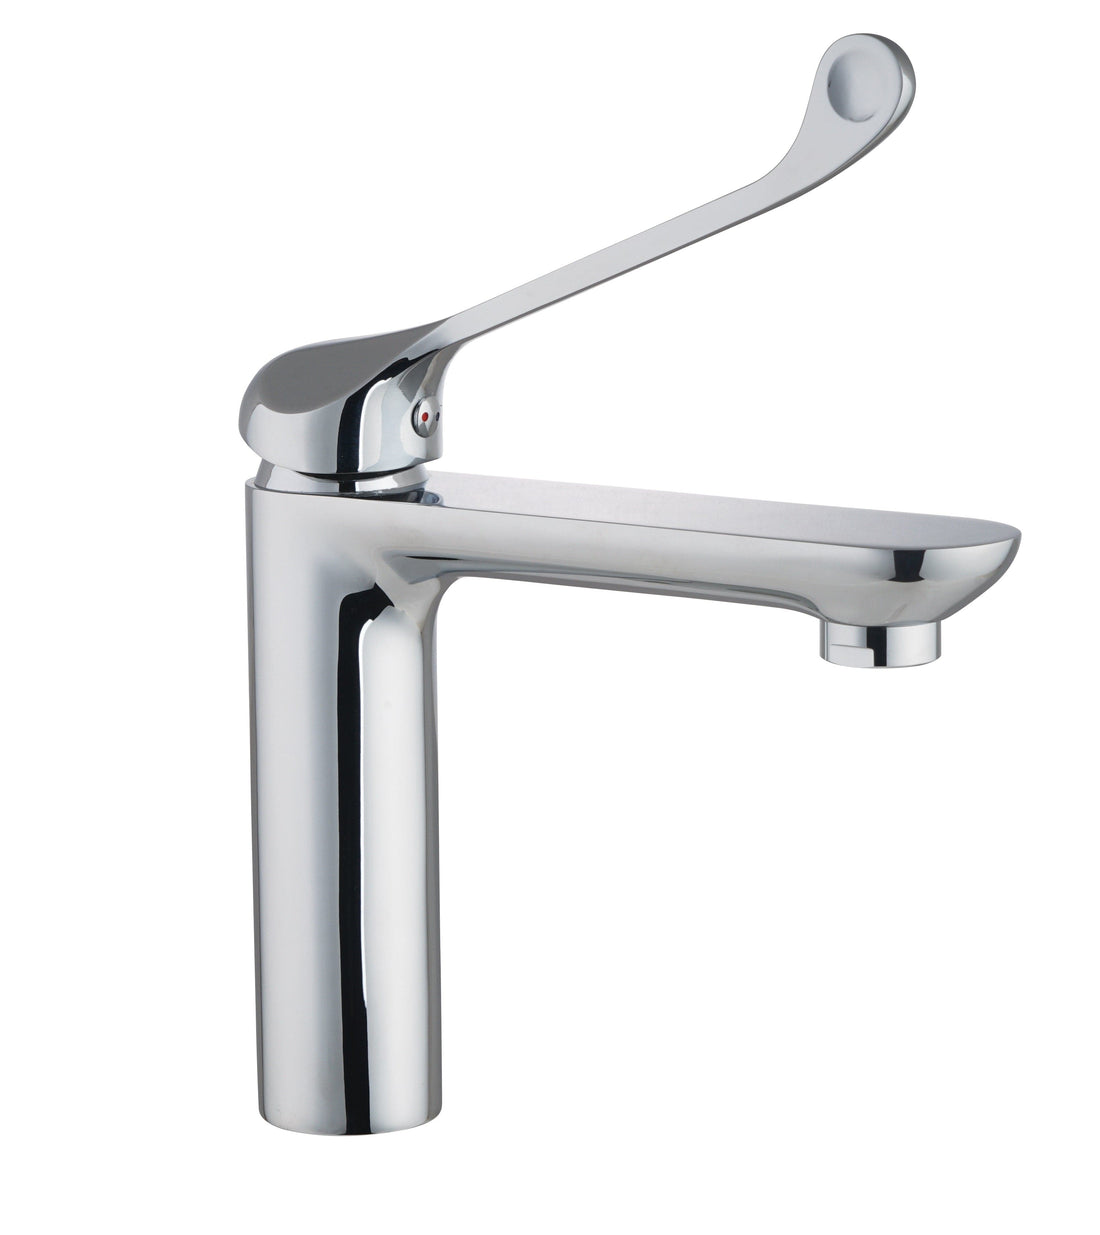 WASHBASIN MIXER WITH CLINICAL LEVER GENKO SERIES